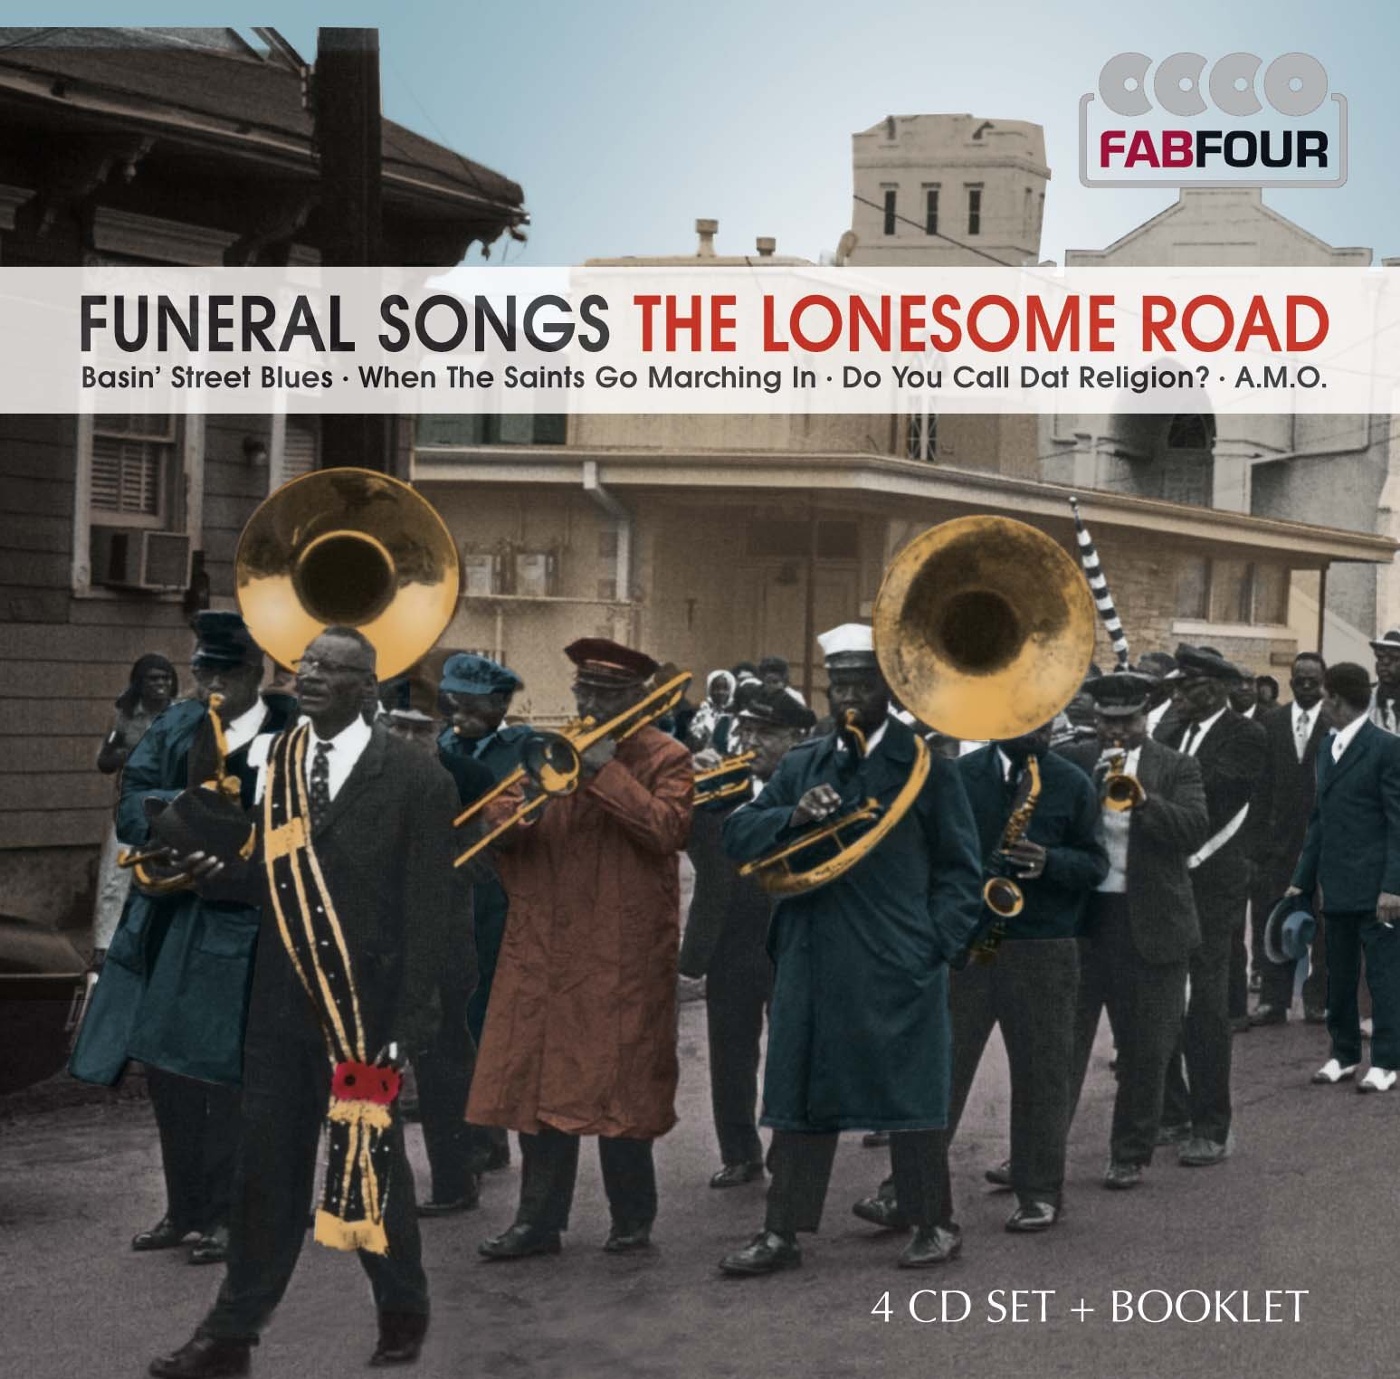 Funeral song перевод. Бадди Болден джаз. Бадди Болден бэнд фото. George Lewis' Ragtime Band of New Orleans. No more Songs Lonesome.